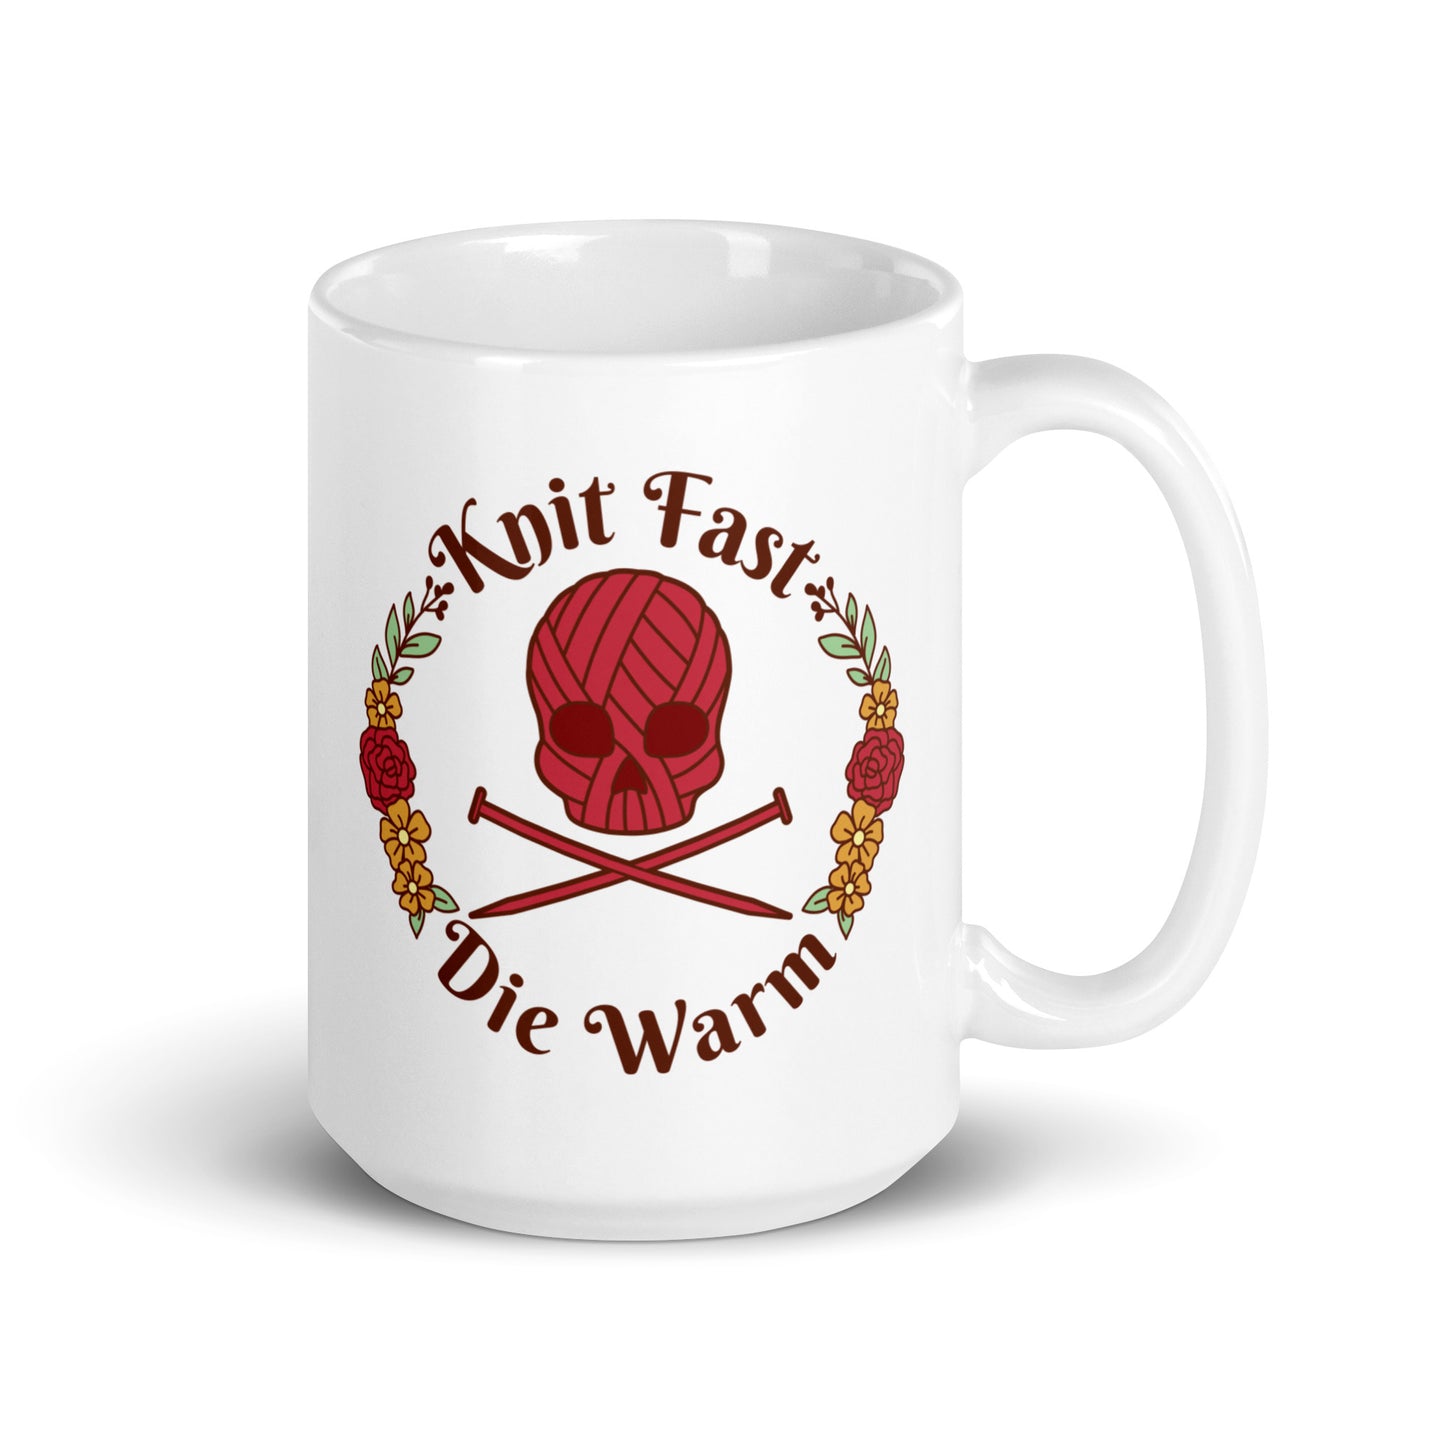 A white 15 ounce mug featuring an image of a red skull and crossbones made of yarn and knitting needles. A floral wreath surrounds the skull, along with words that read "Knit Fast, Die Warm"